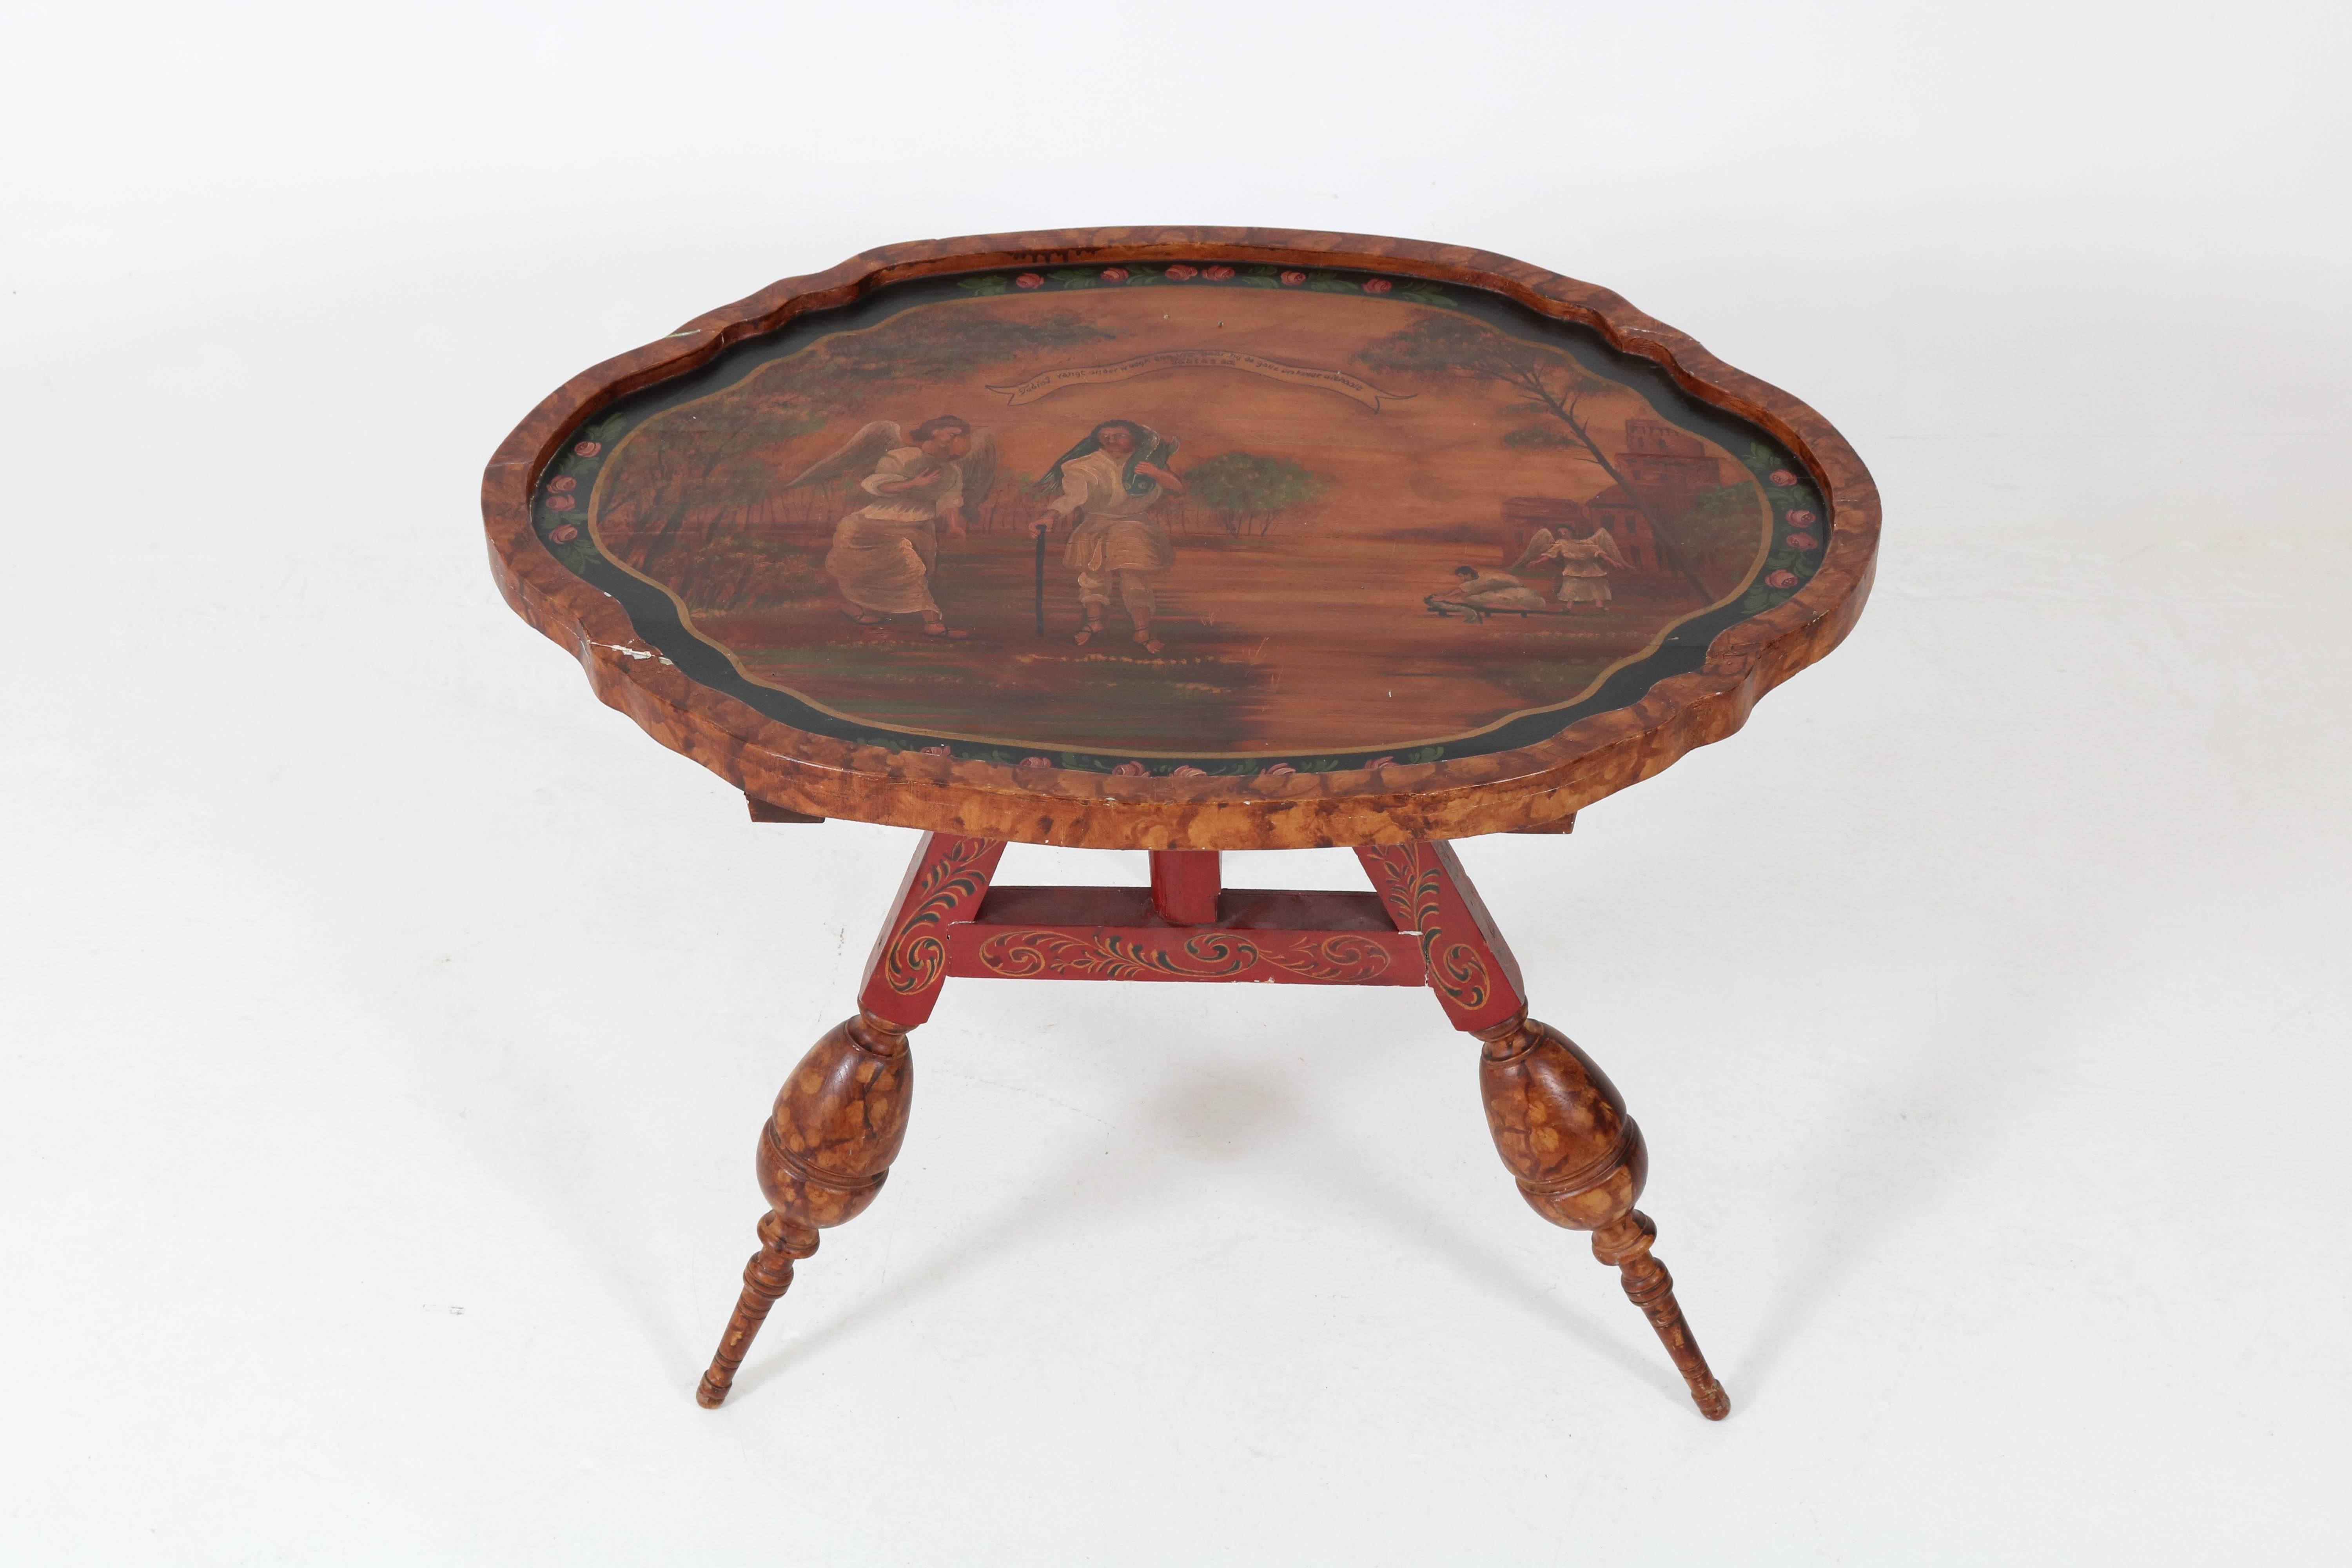 Stunning Dutch Provincial Flap aan de Wand table, 1900s.
Original painted wood in Hindelopen style.
Top and back are hand-painted with images based on the bible.
In good original condition with minor wear consistent with age and use,
preserving